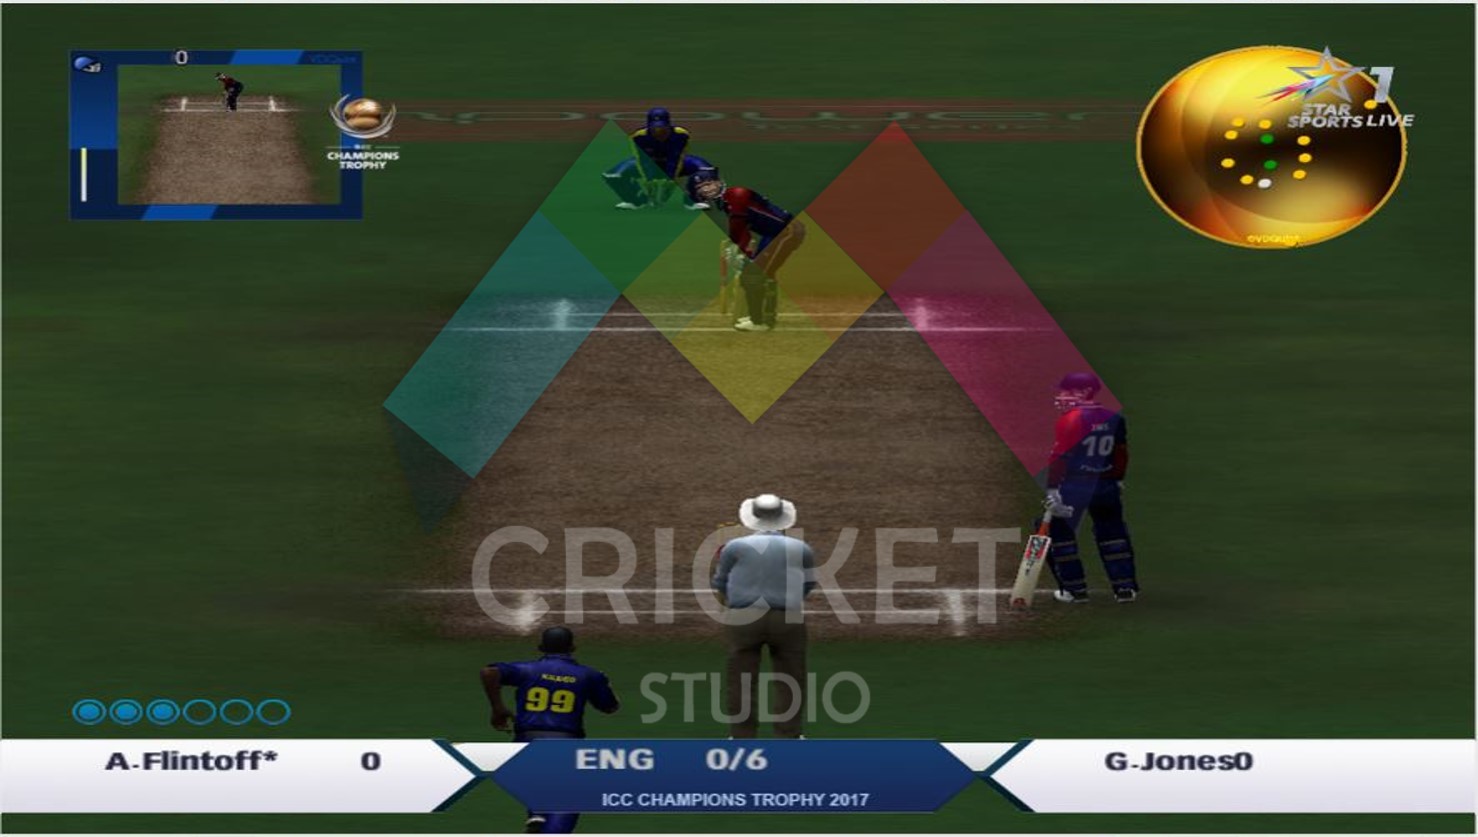 psl circket game for pc latest 2019